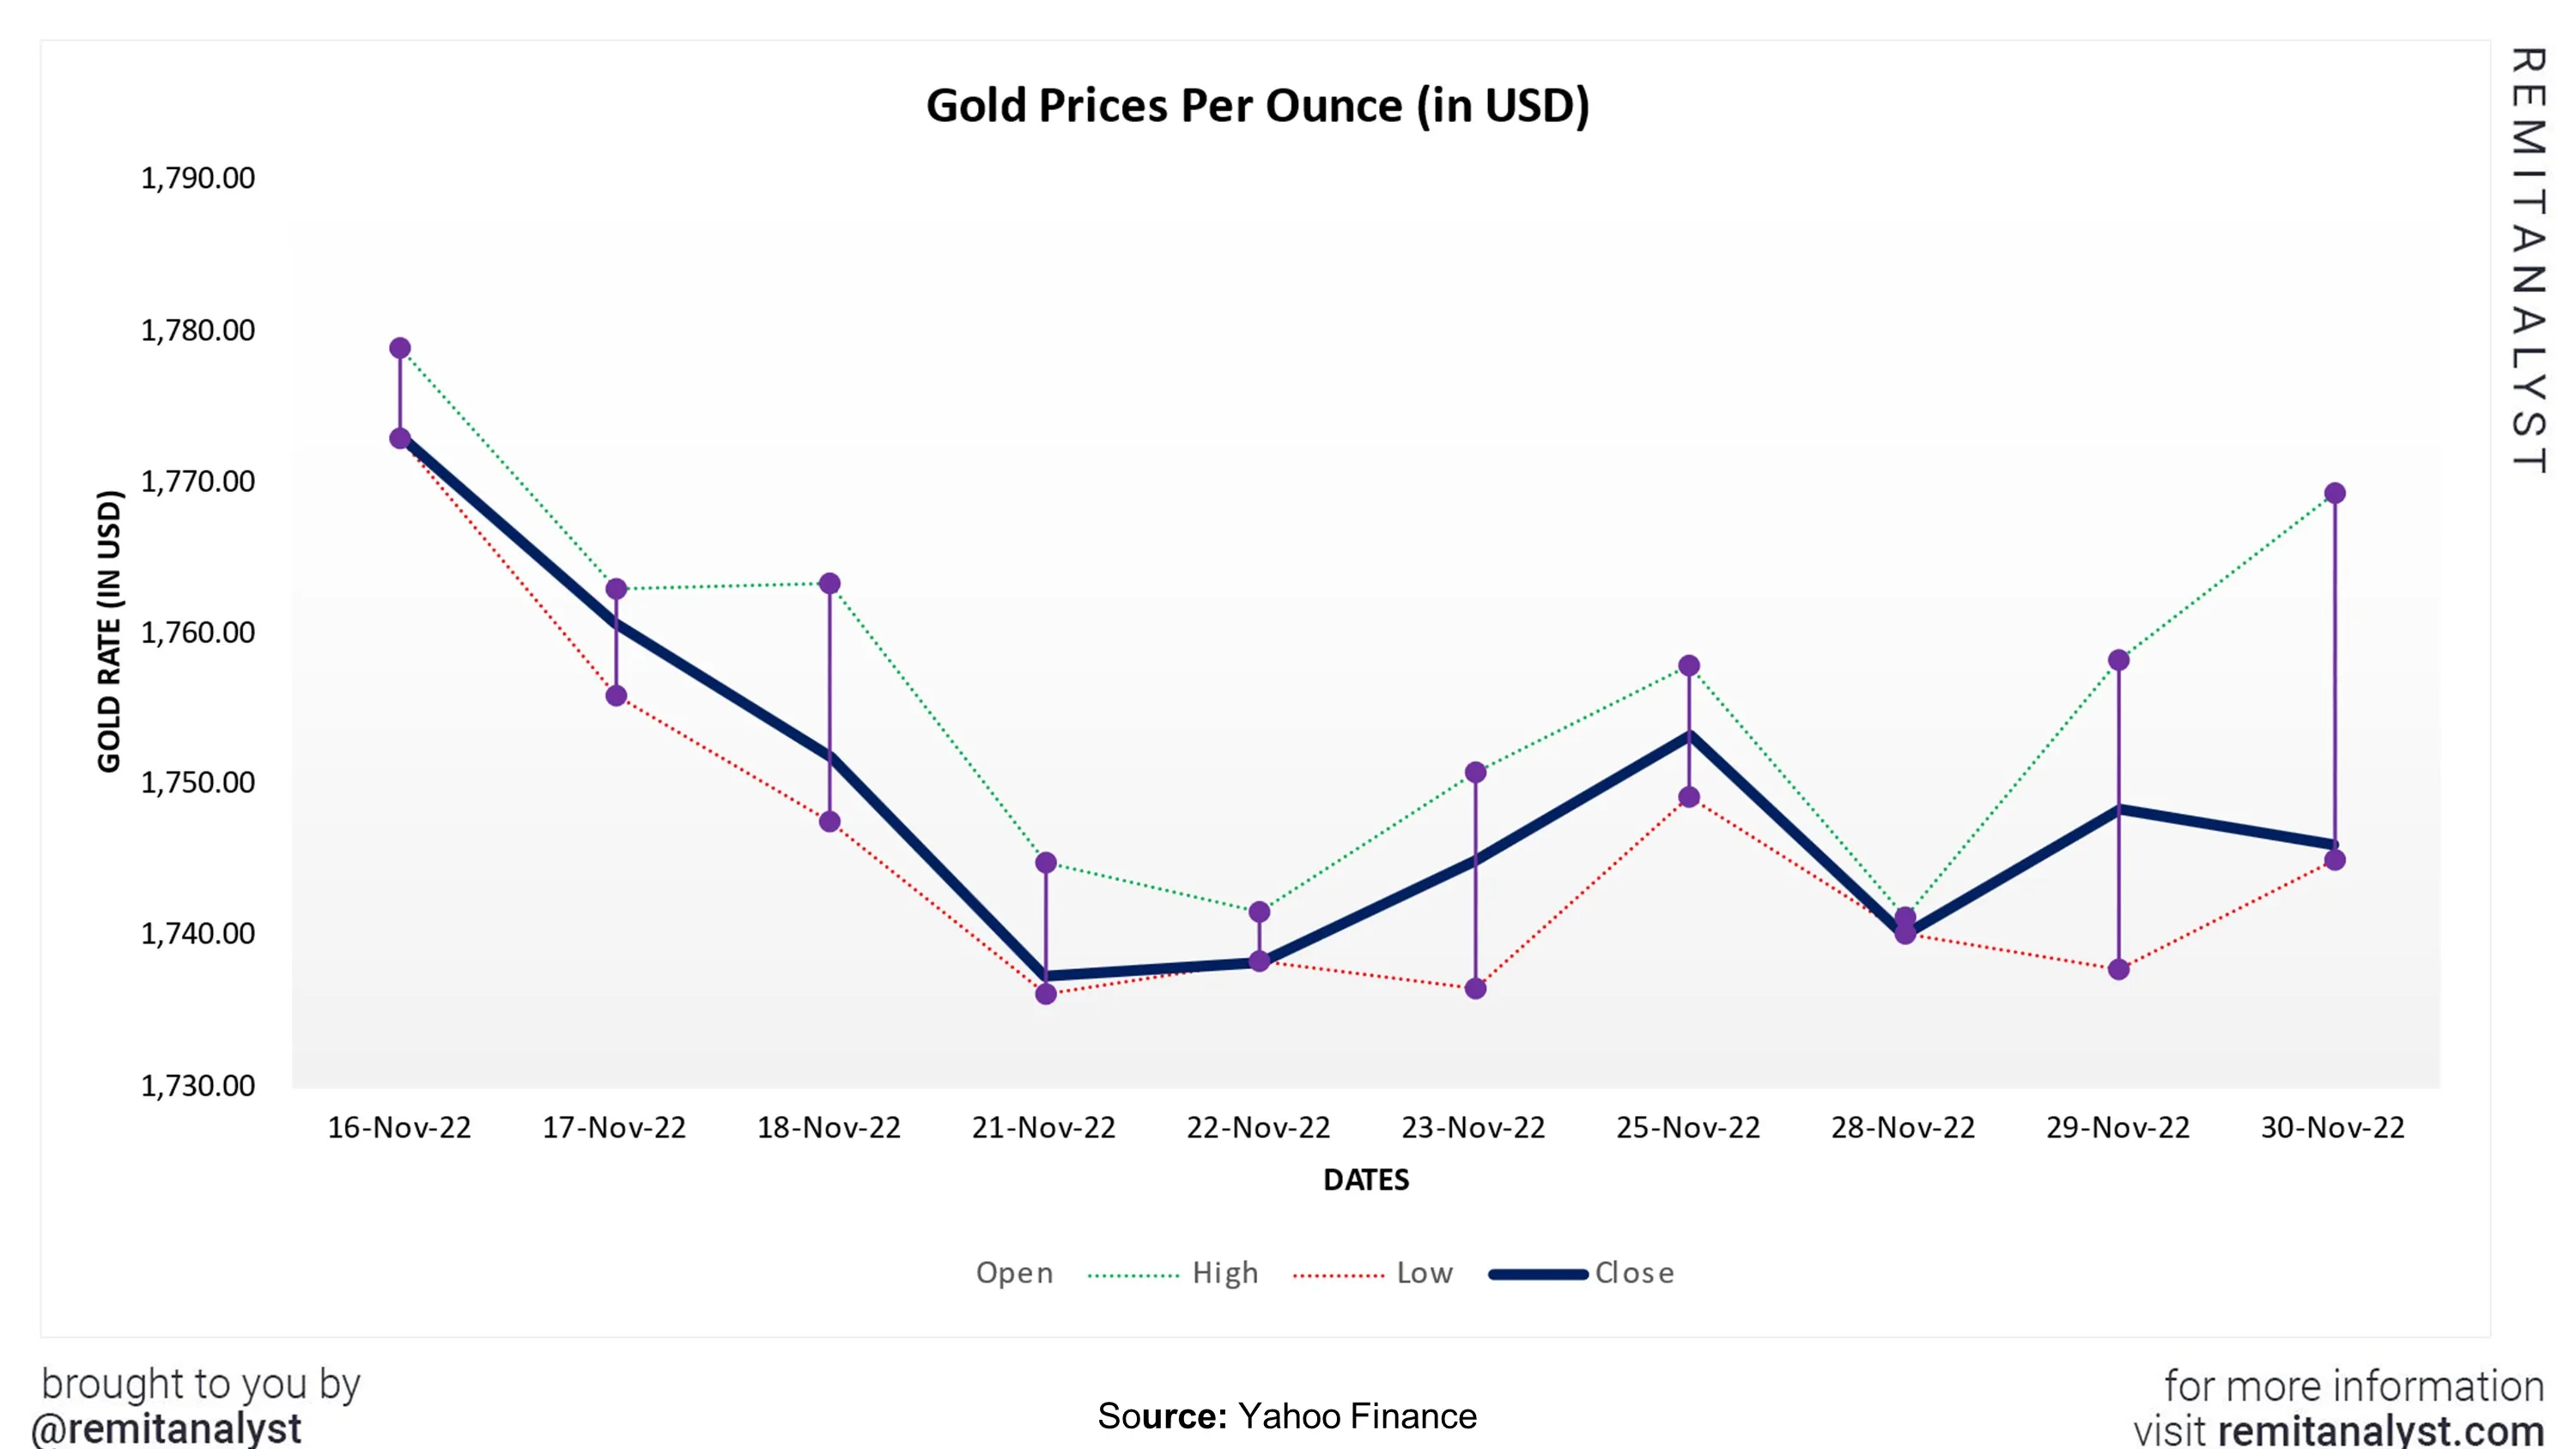 gold-prices-from-16-nov-2022-to-30-nov-2022